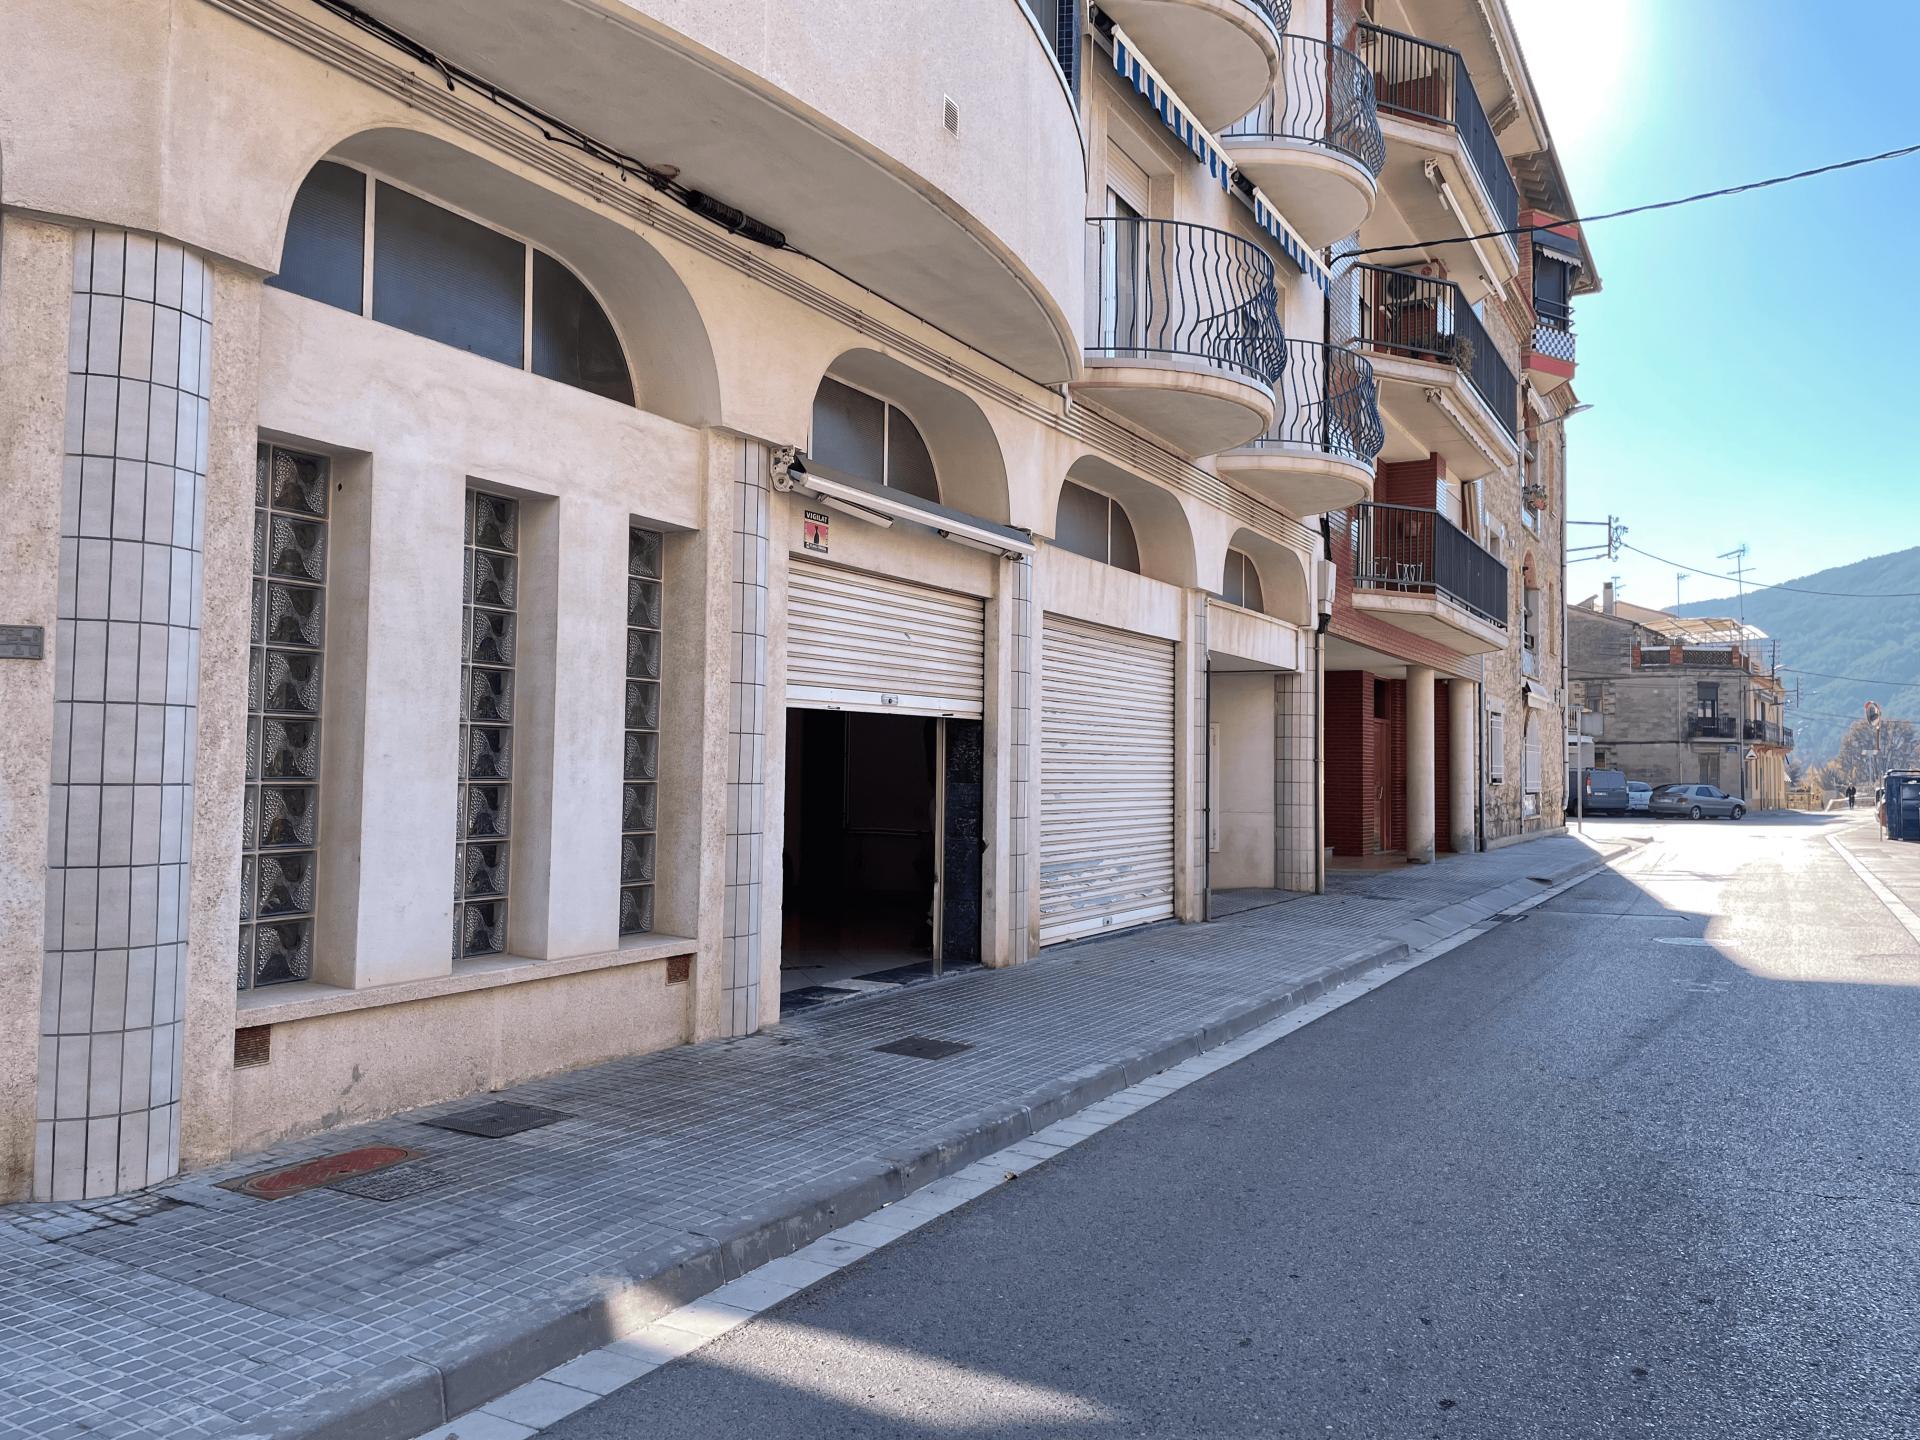 Local comercial, 230 m²